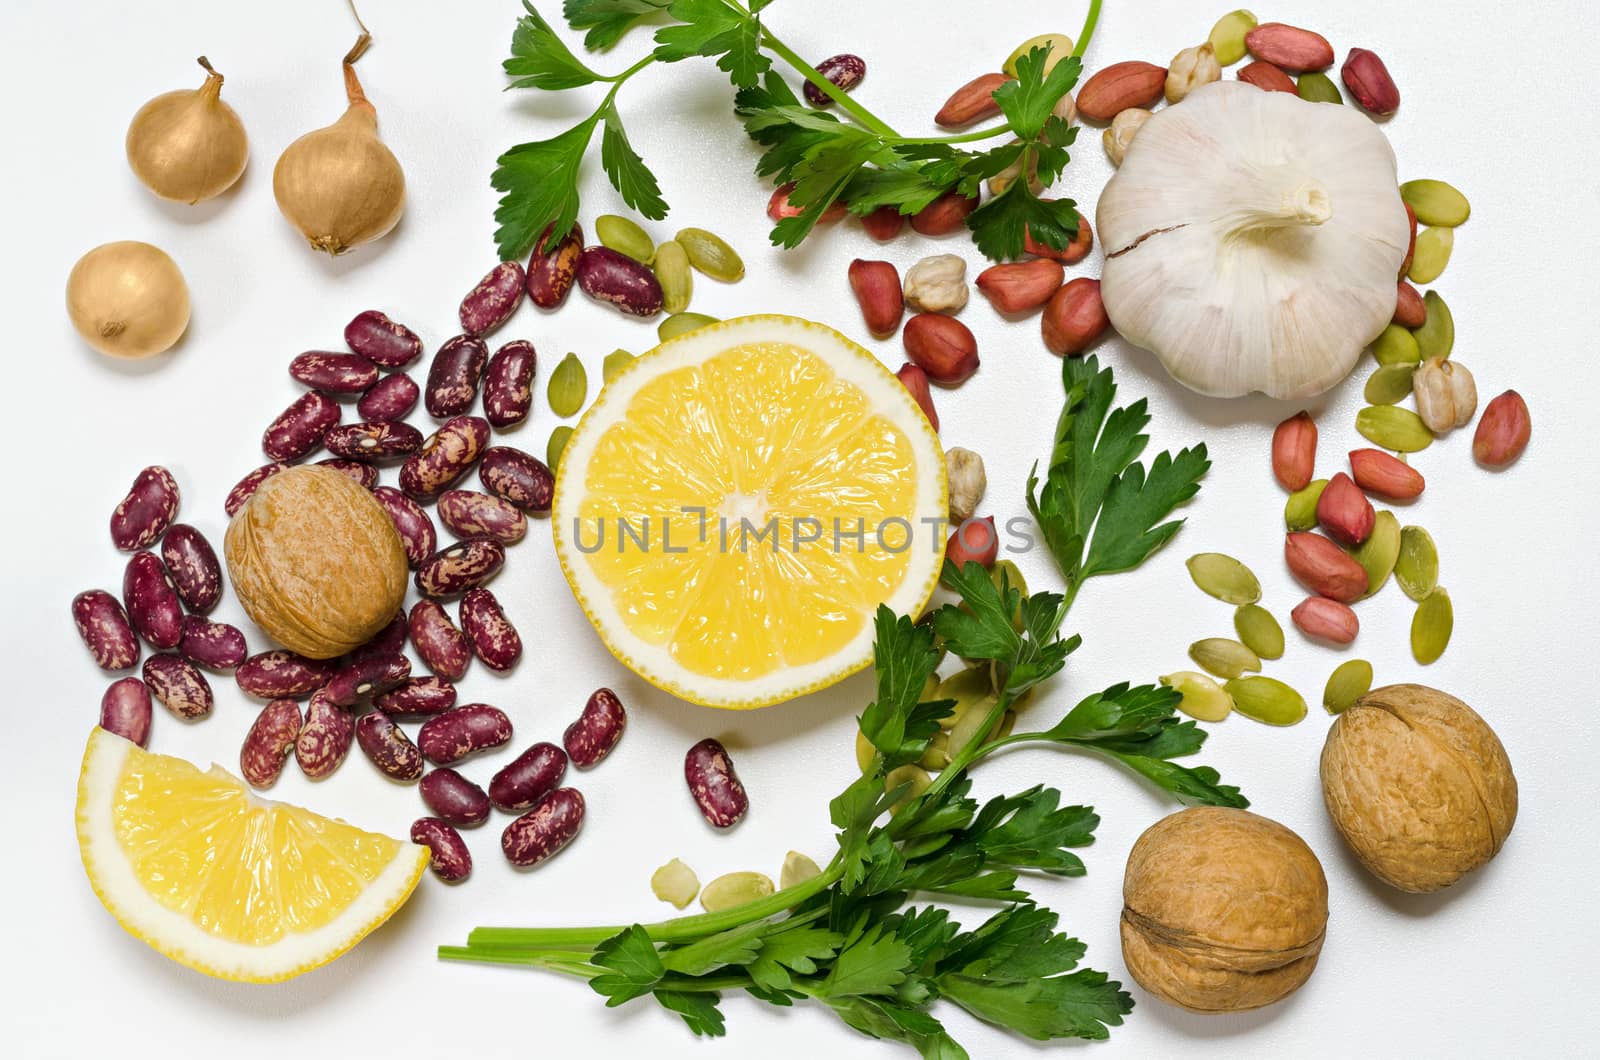 Lemon, beans,nuts and spices lie groups on a white background by Gaina